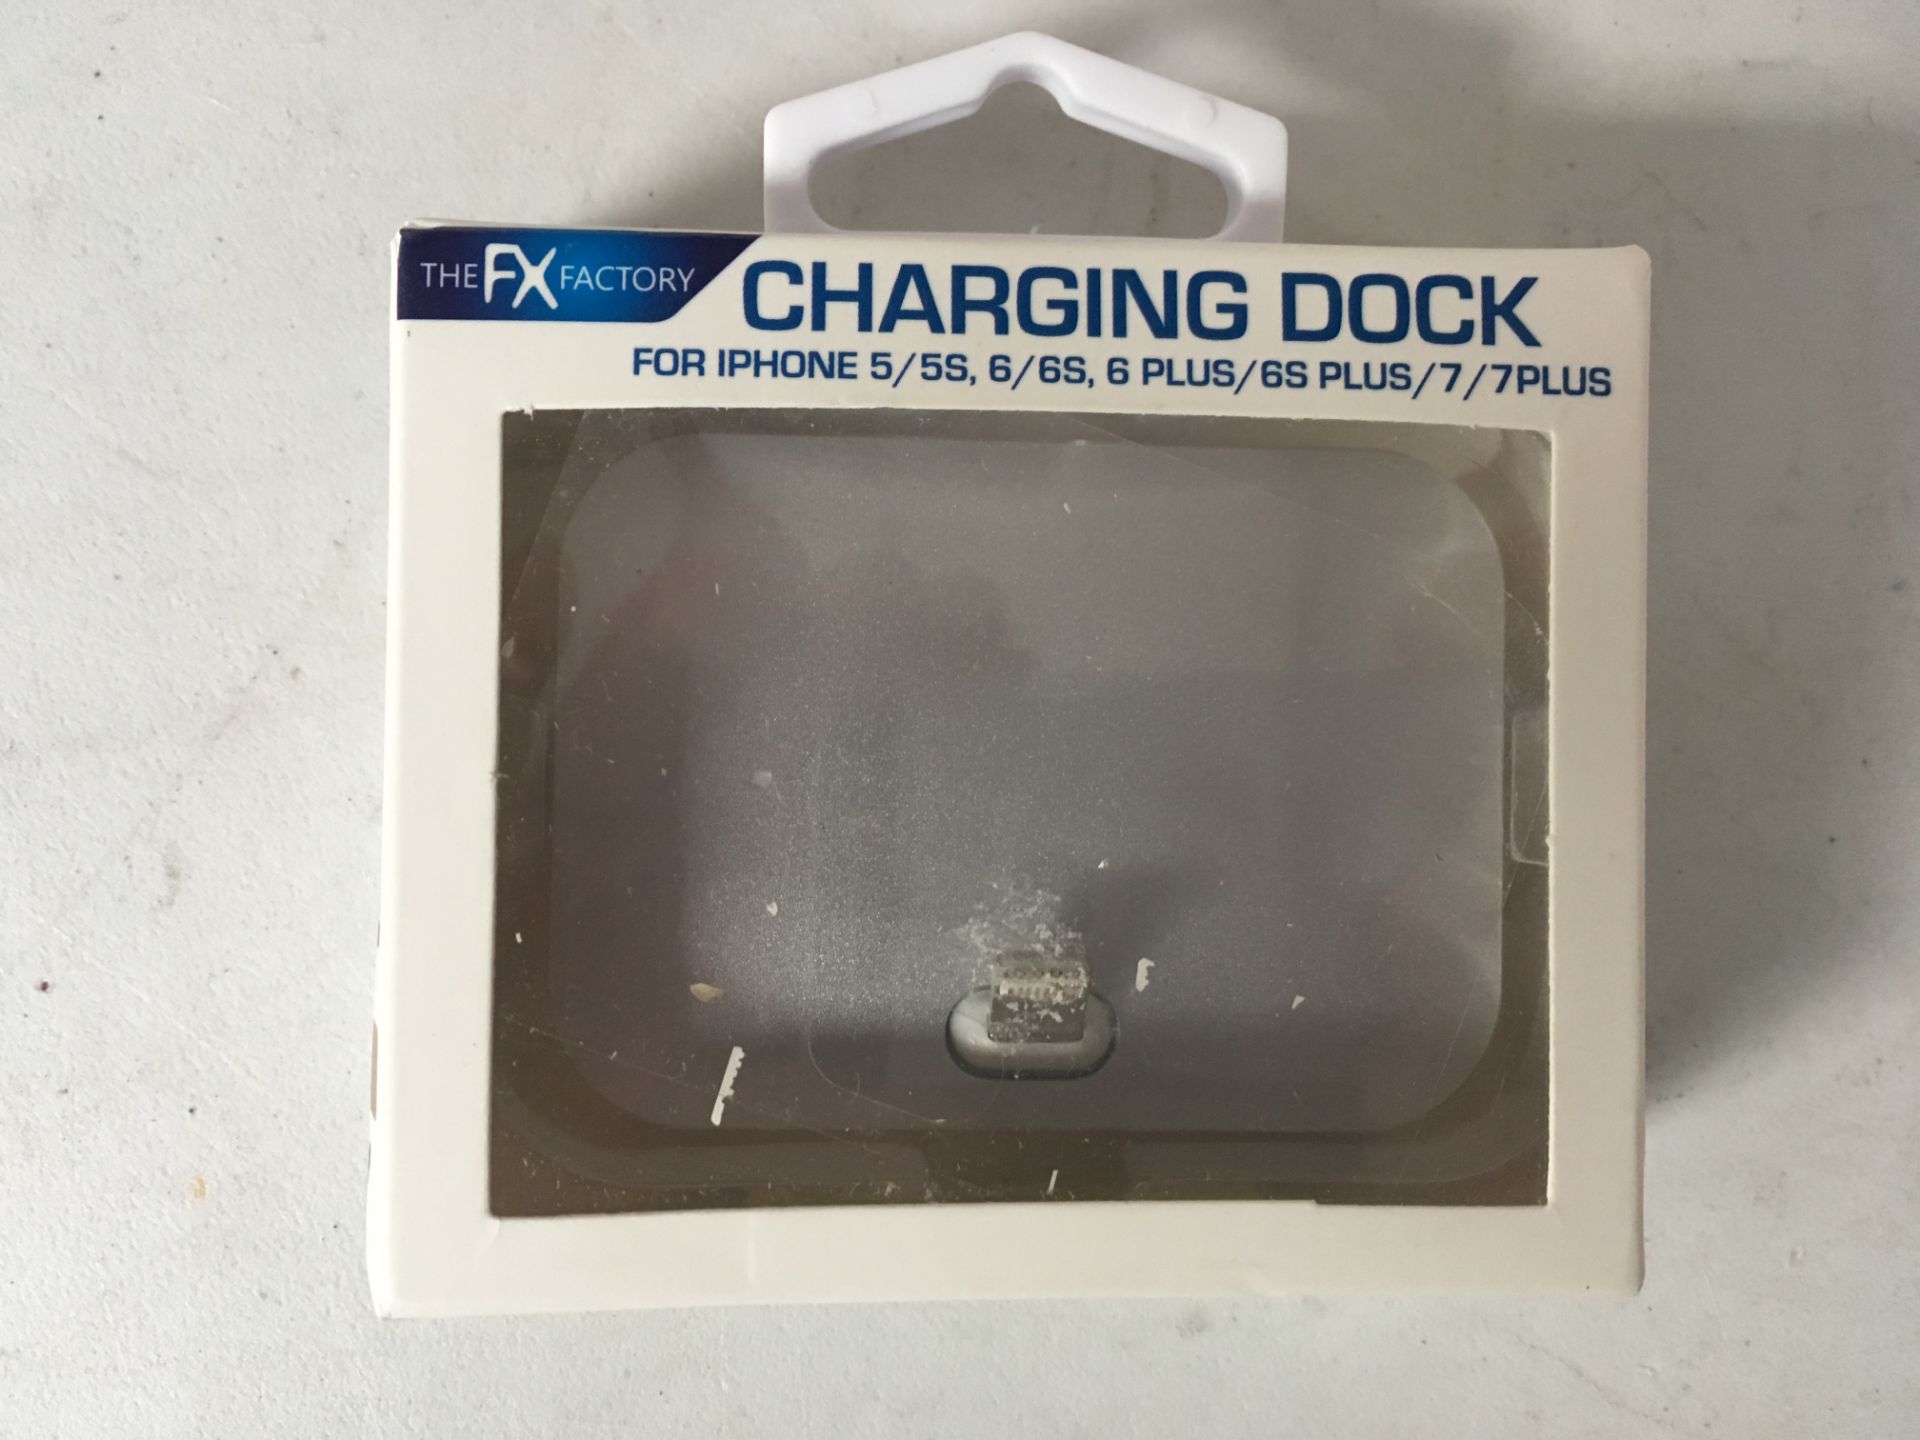 Charging dock for iphone 5/5s/6/6s/6 plus/6s plus/7/7 plus. New.